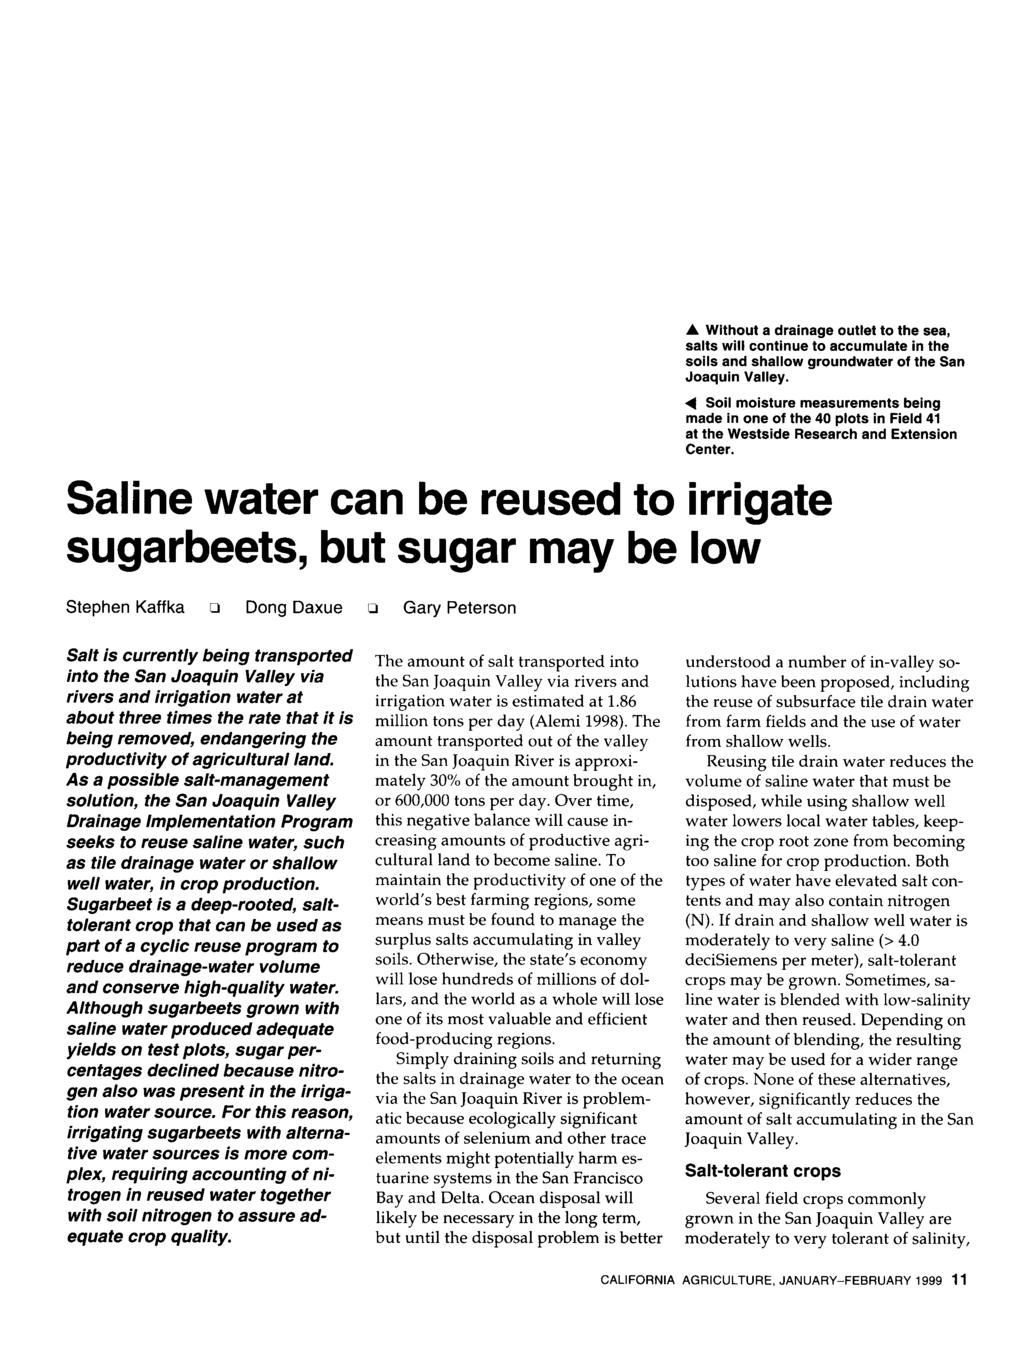 A Without a drainage outlet to the sea, salts will continue to accumulate in the soils and shallow groundwater of the San Joaquin Valley.